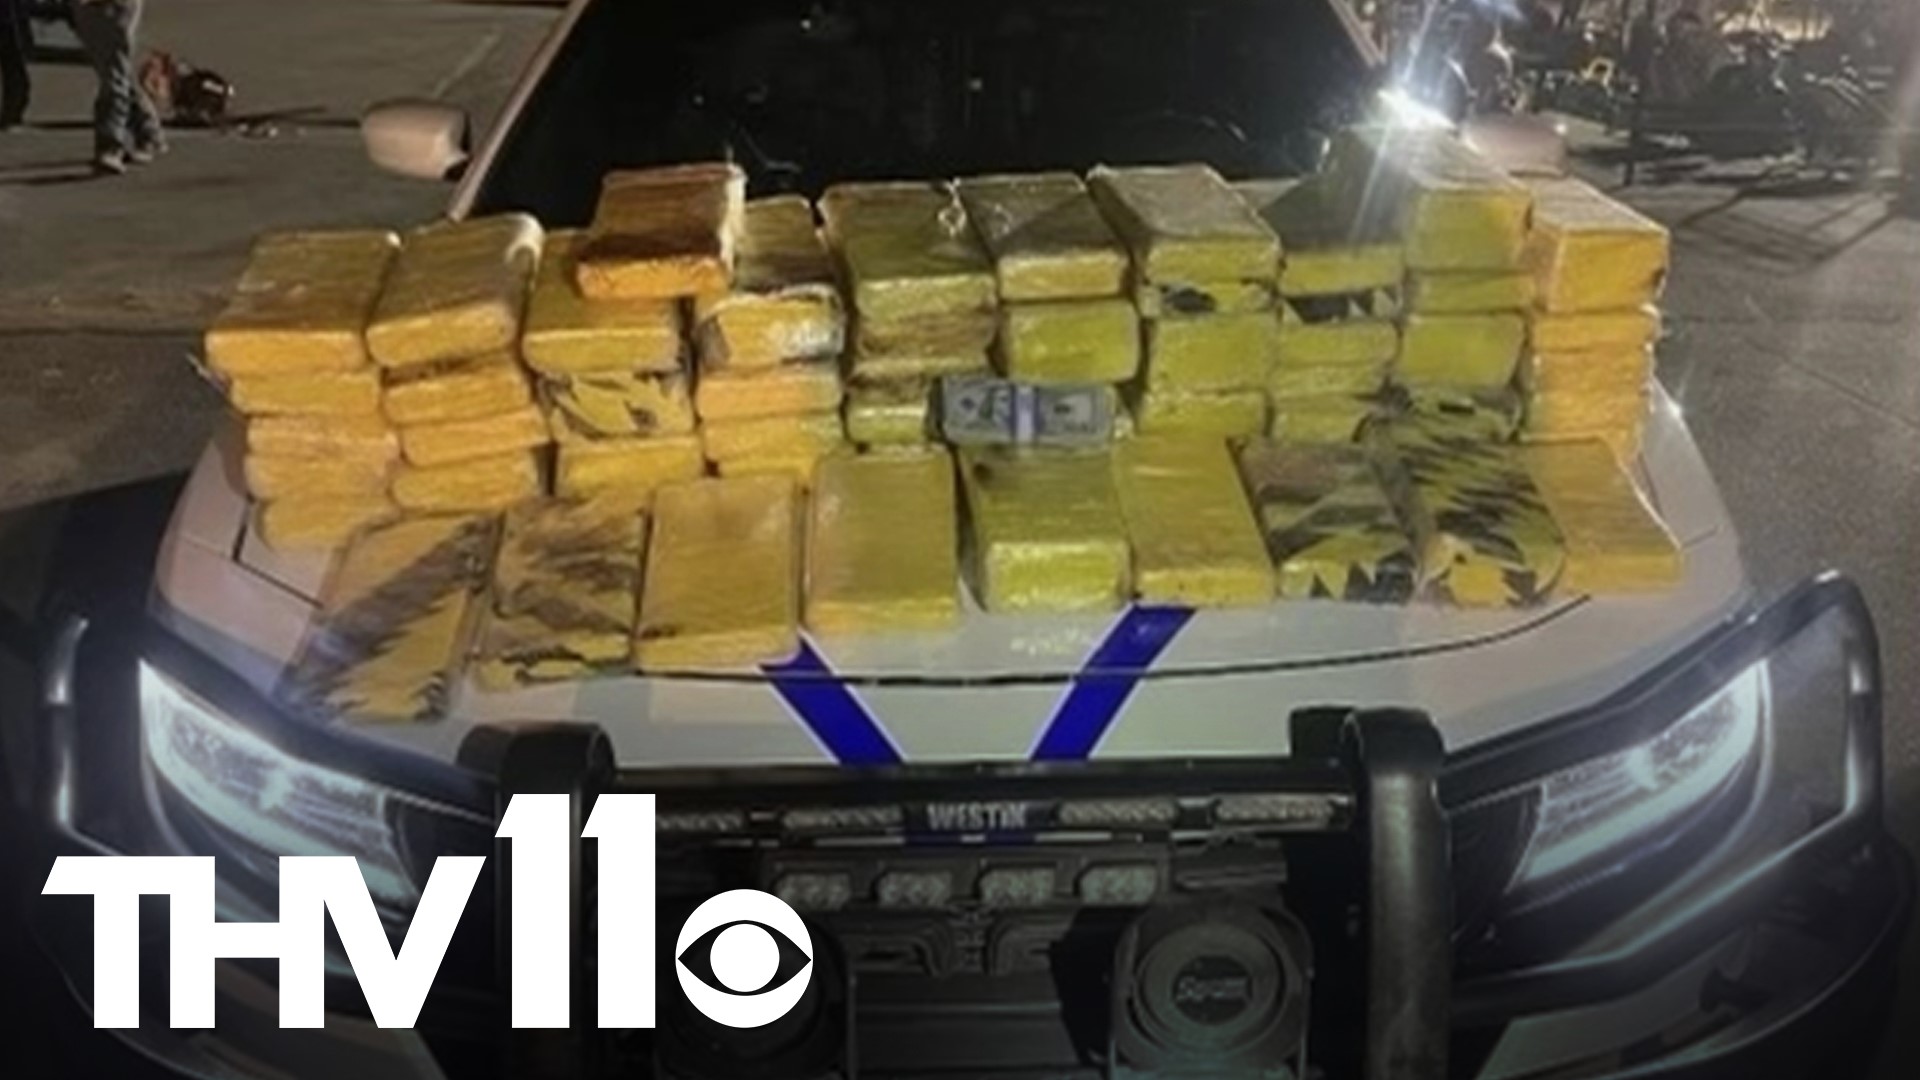 Two suspects are now in custody after Arkansas State Police found about $6.5 million worth of cocaine during a traffic stop.